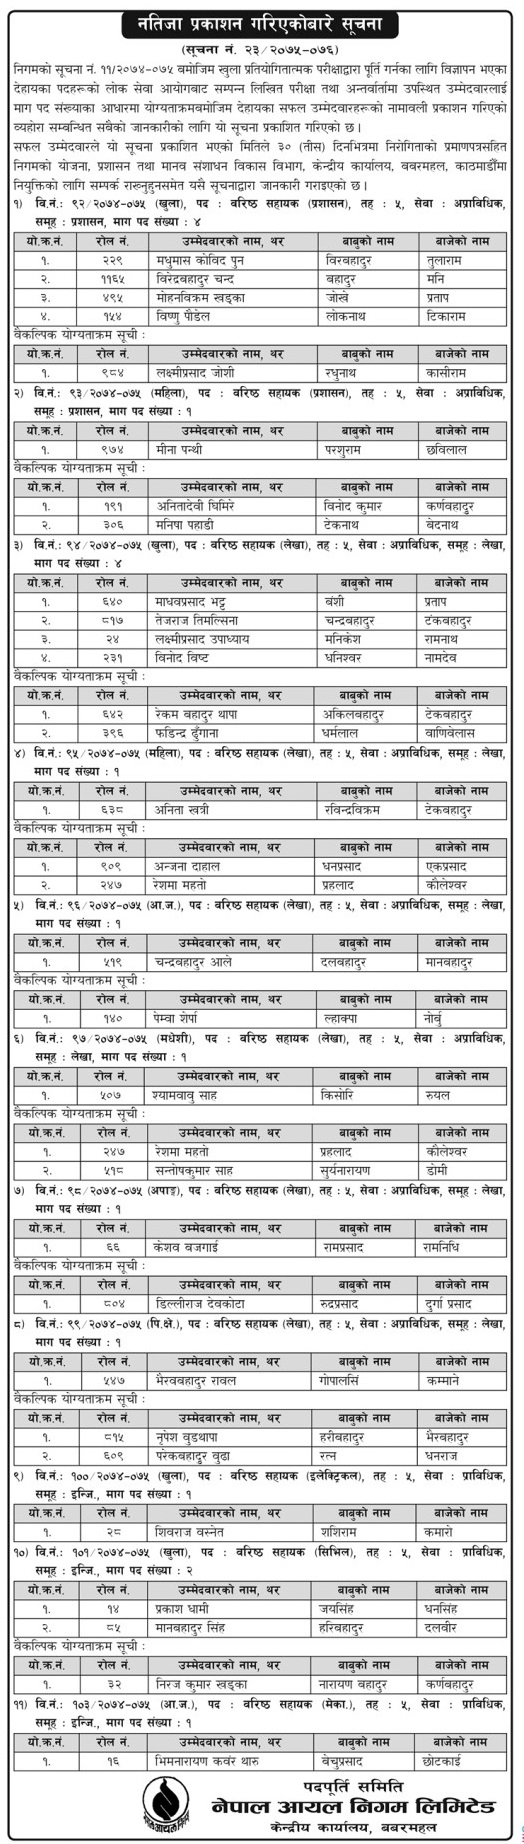 Nepal Oil Corporation Published Final Result of Written Exam and Interview